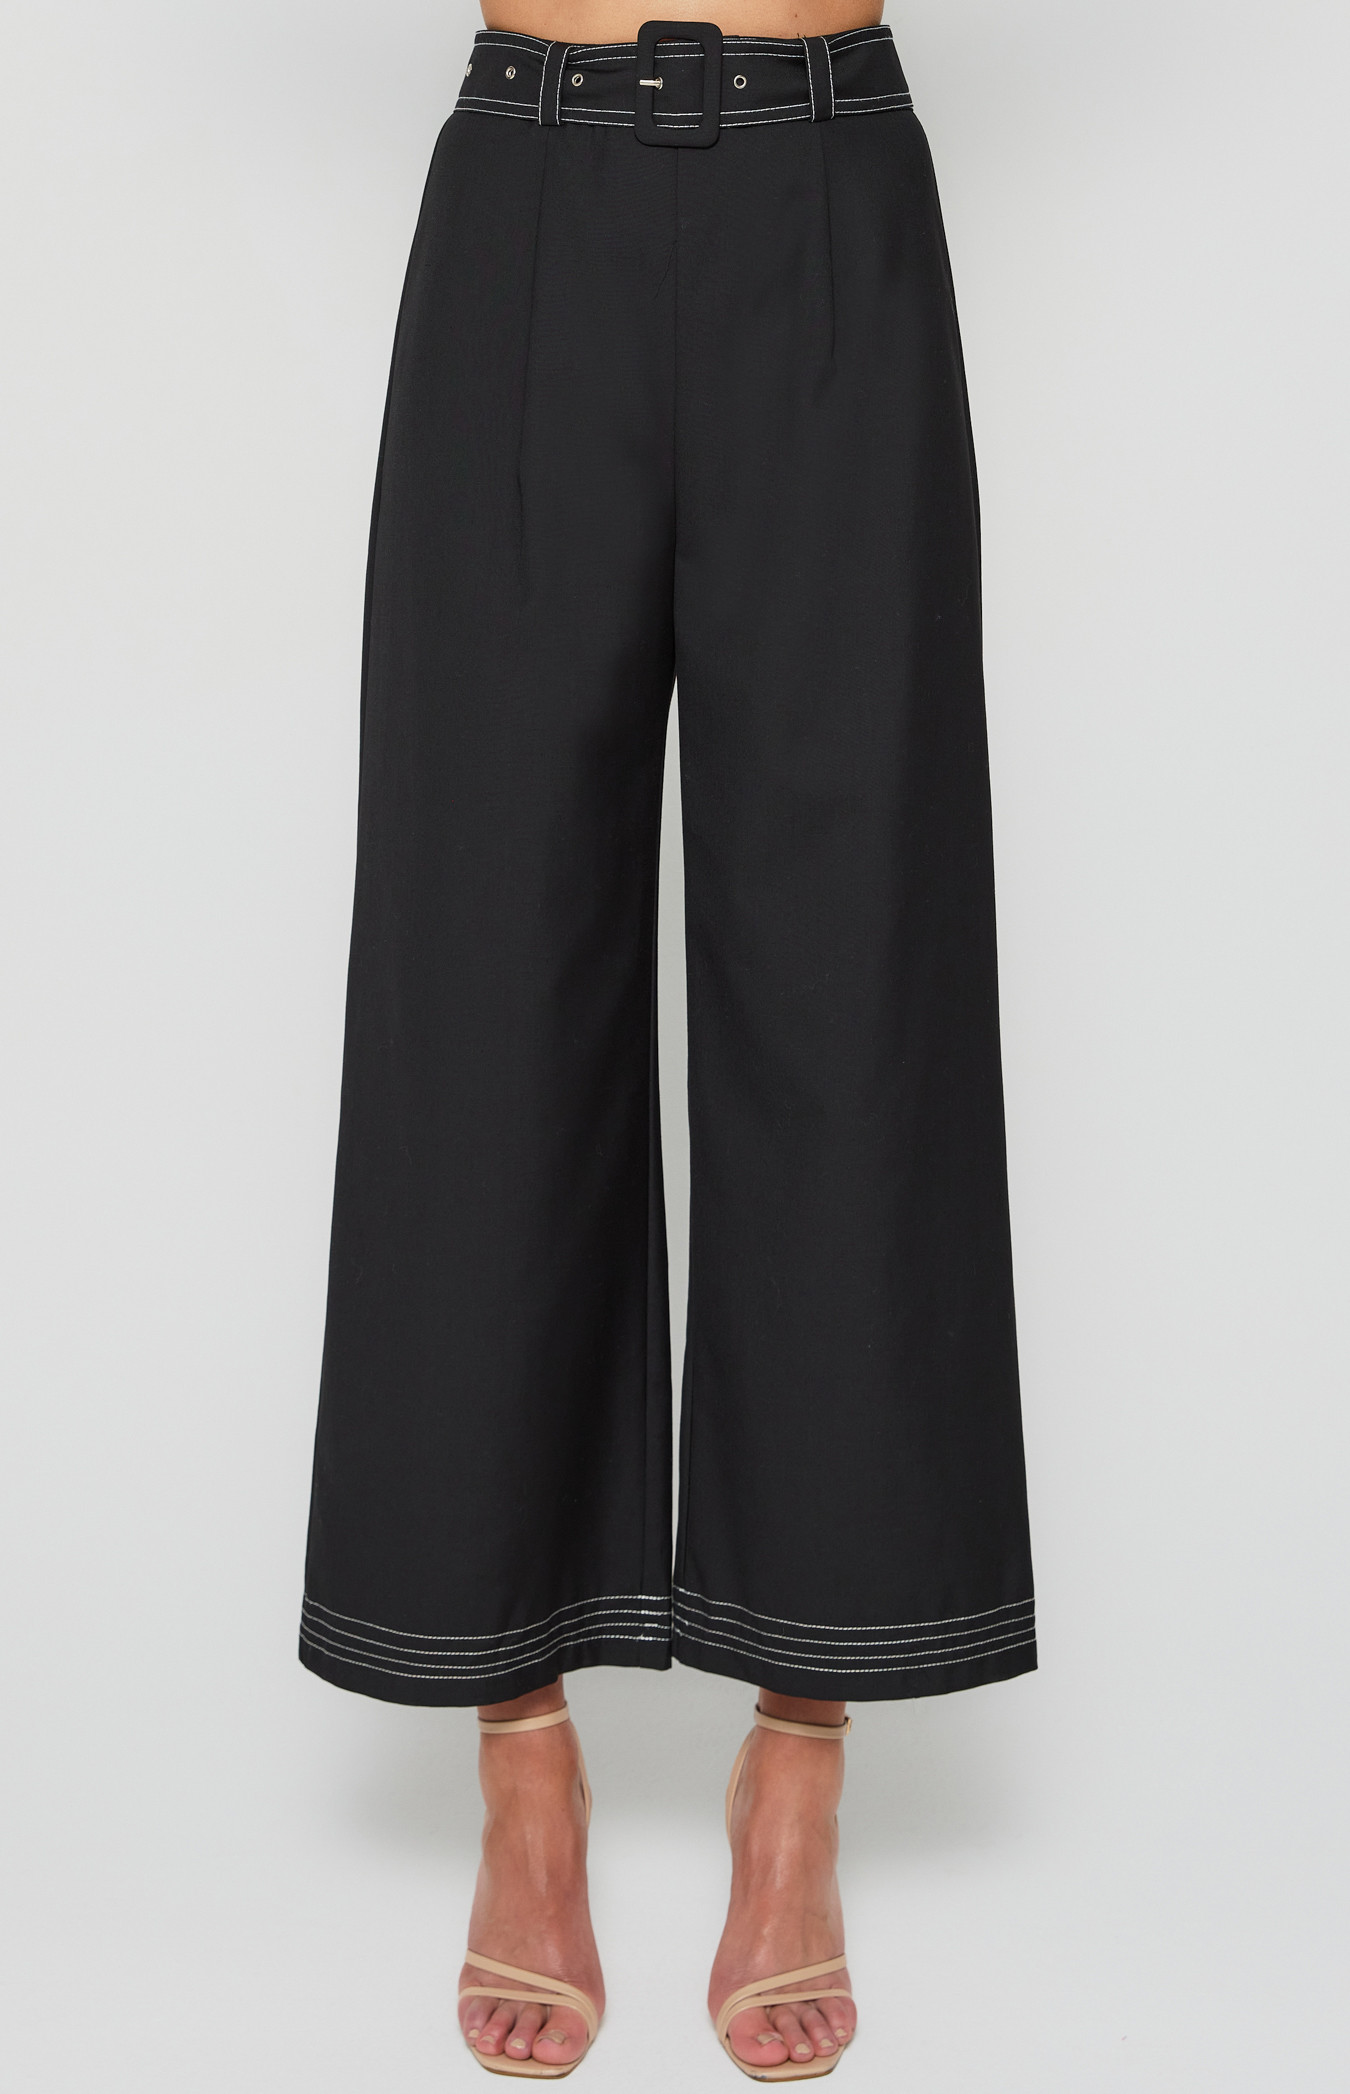 Contrast Stitching Wide Leg Pants with Belt Buckle (WPA256A)